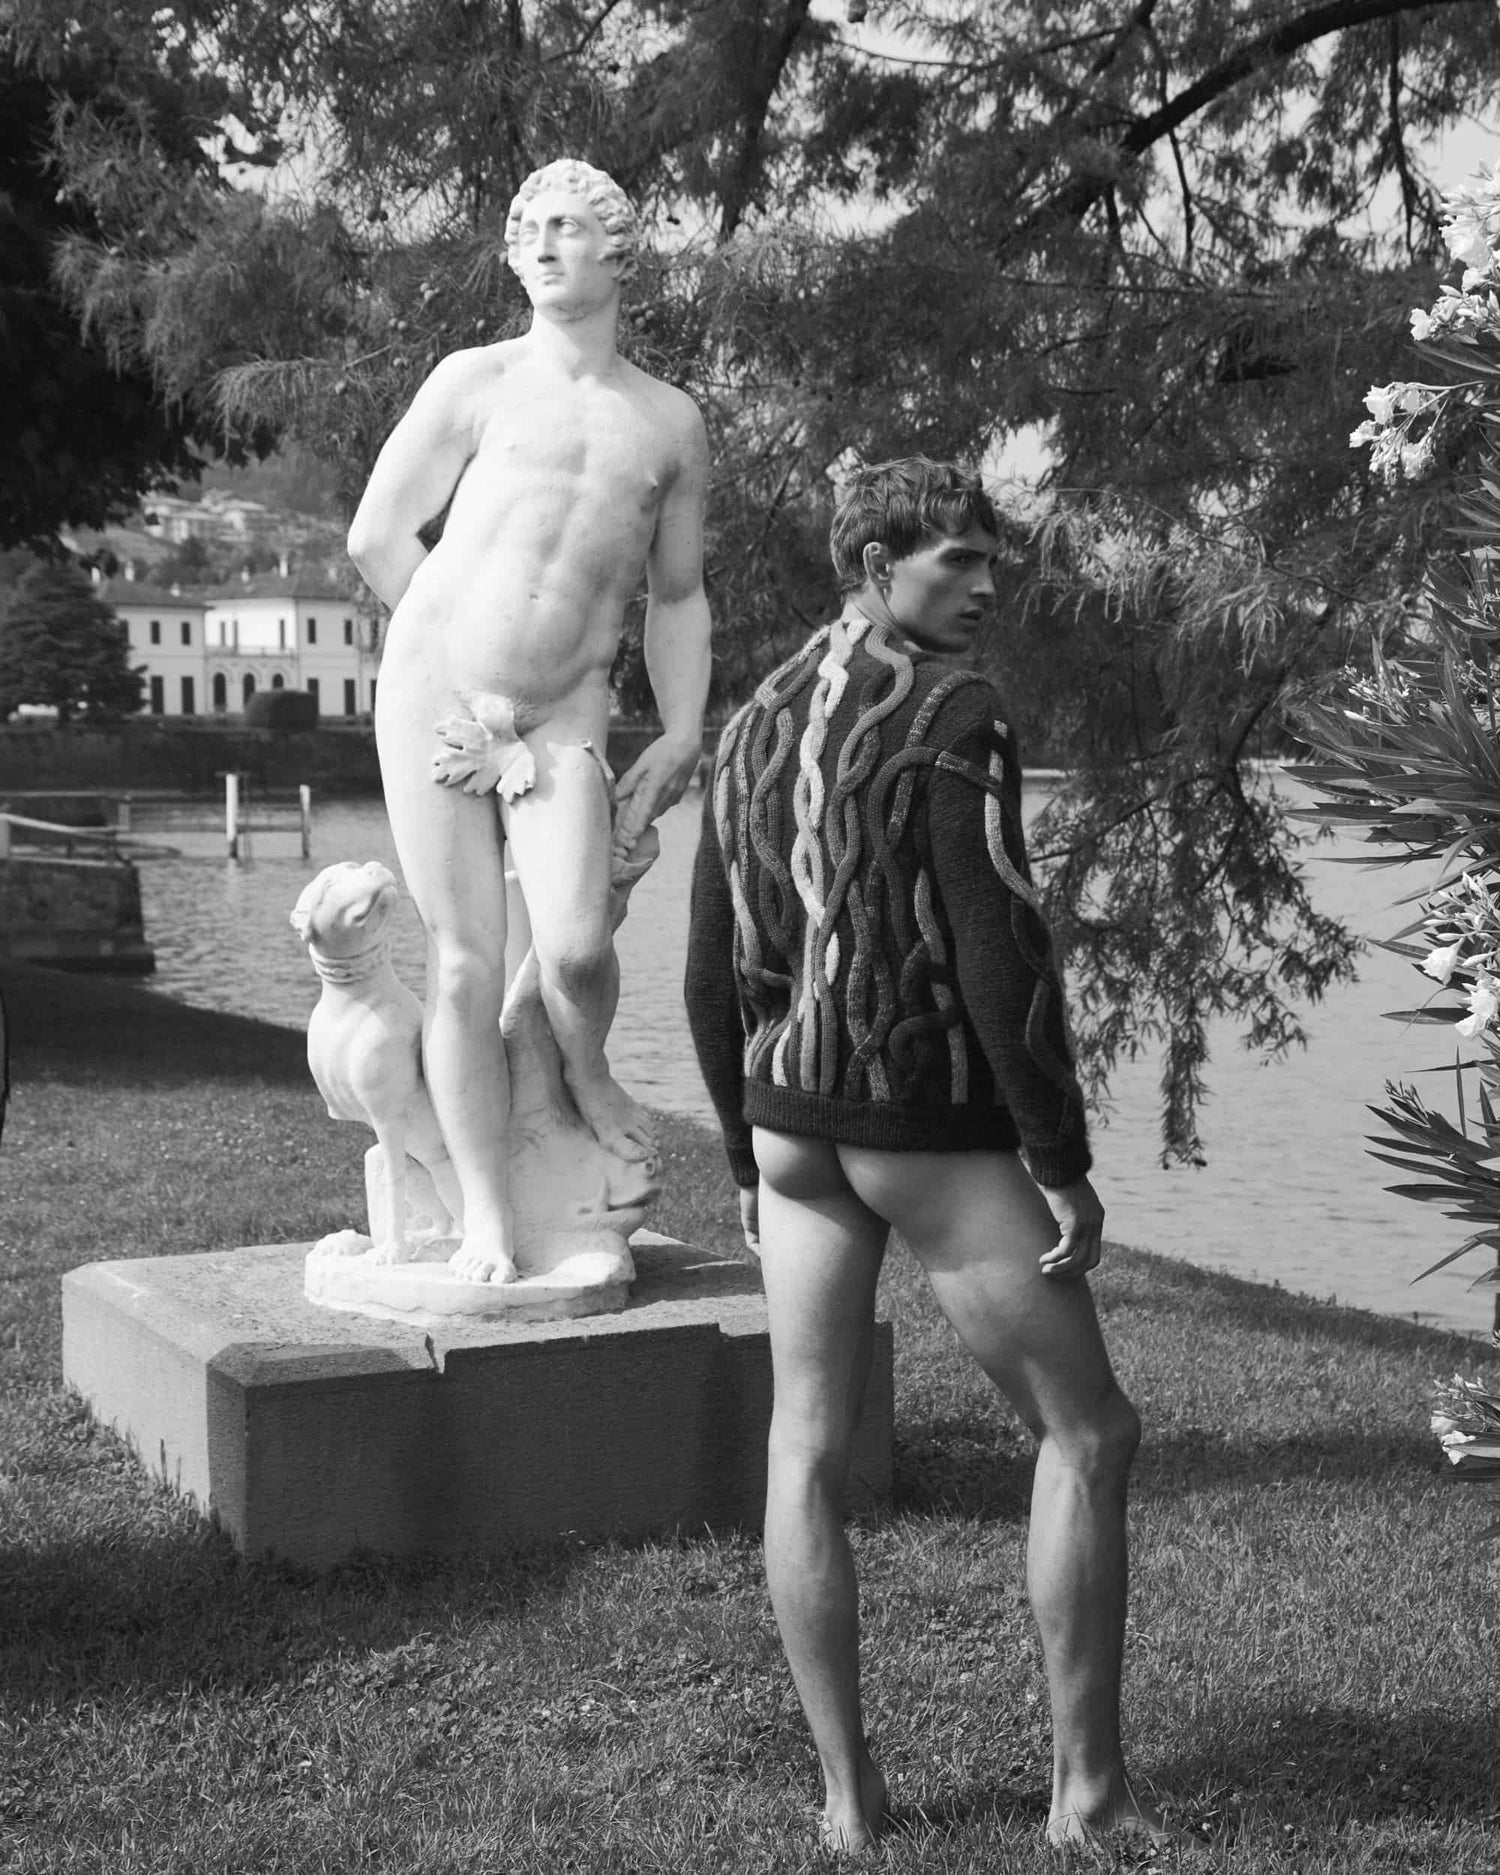 The artpiece 'Intimate' by Andreas Ortner shows a man from the back wearing a sweater and no bottoms standing diagonally in front of a greek statue of a naked man. 